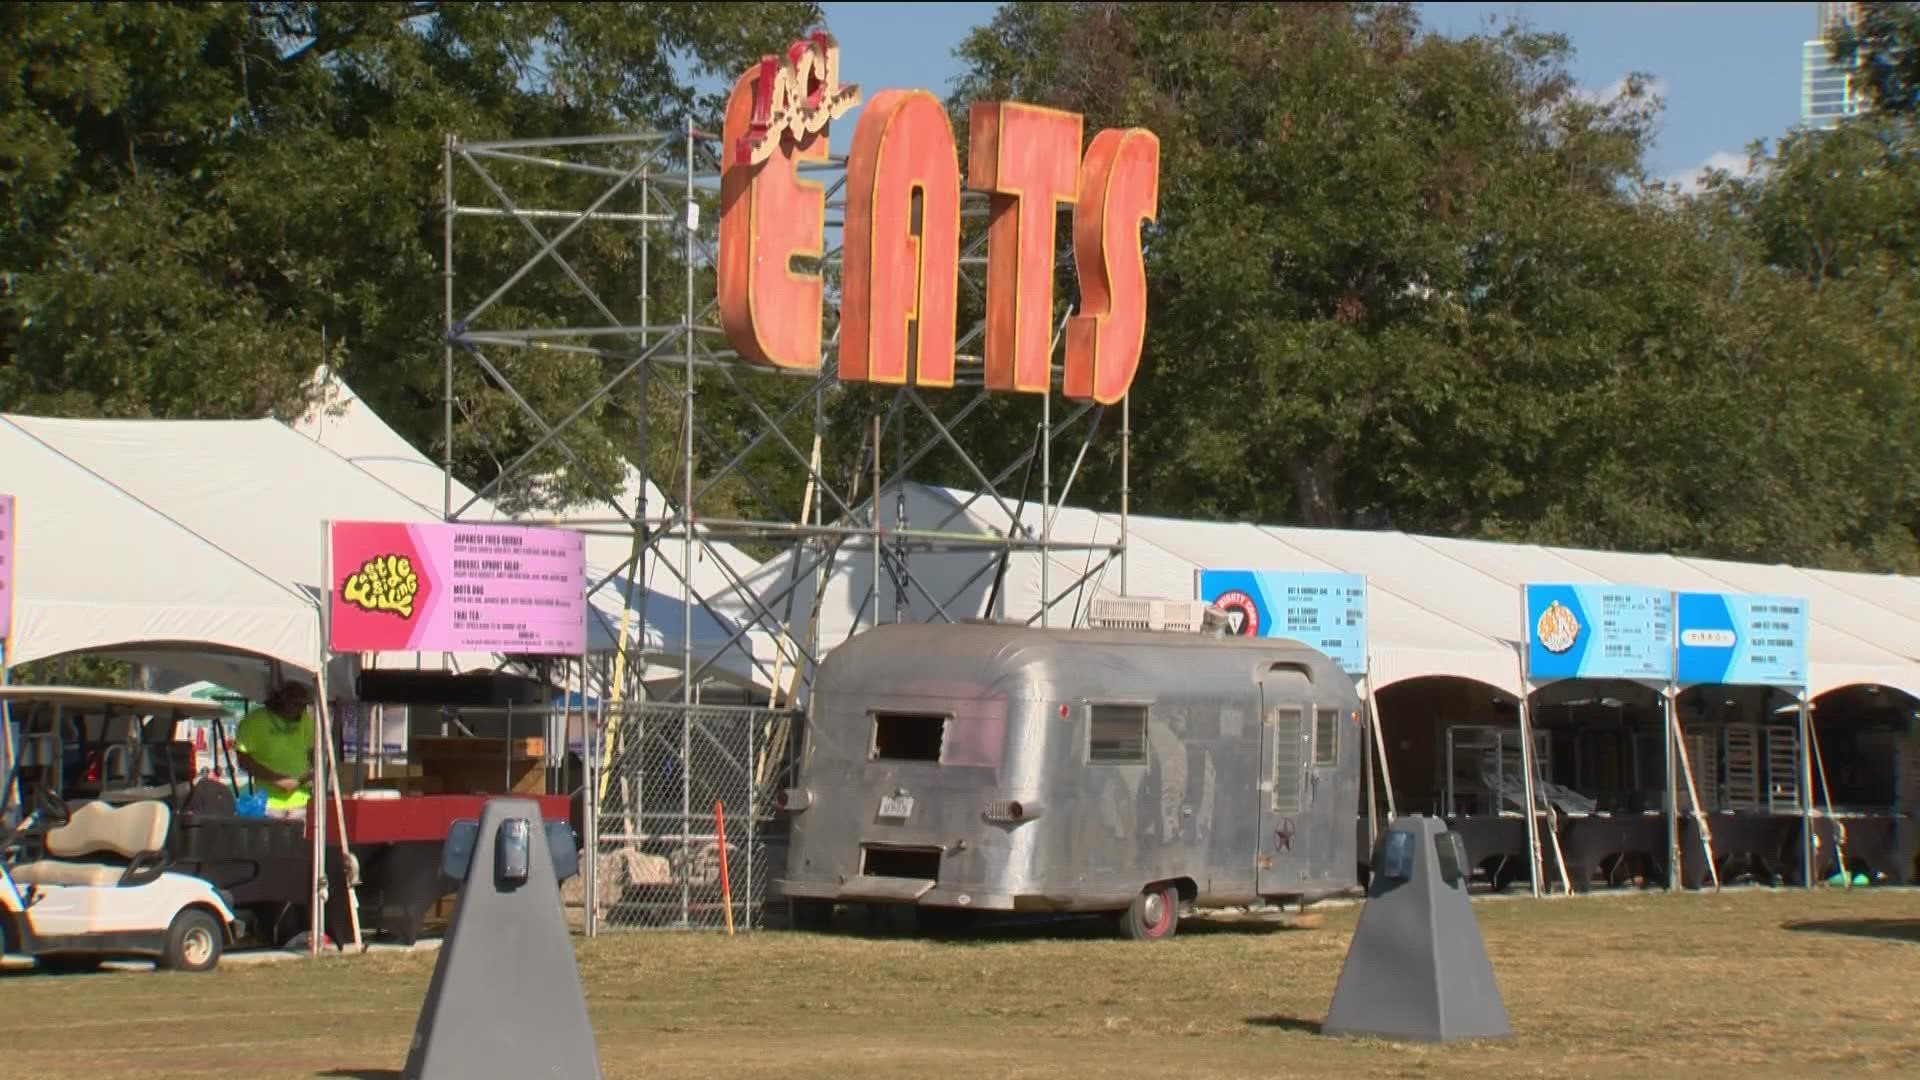 While the music is the main attraction, this weekend marks some of the most important days of the year for local food trucks at the ACL Music Festival.